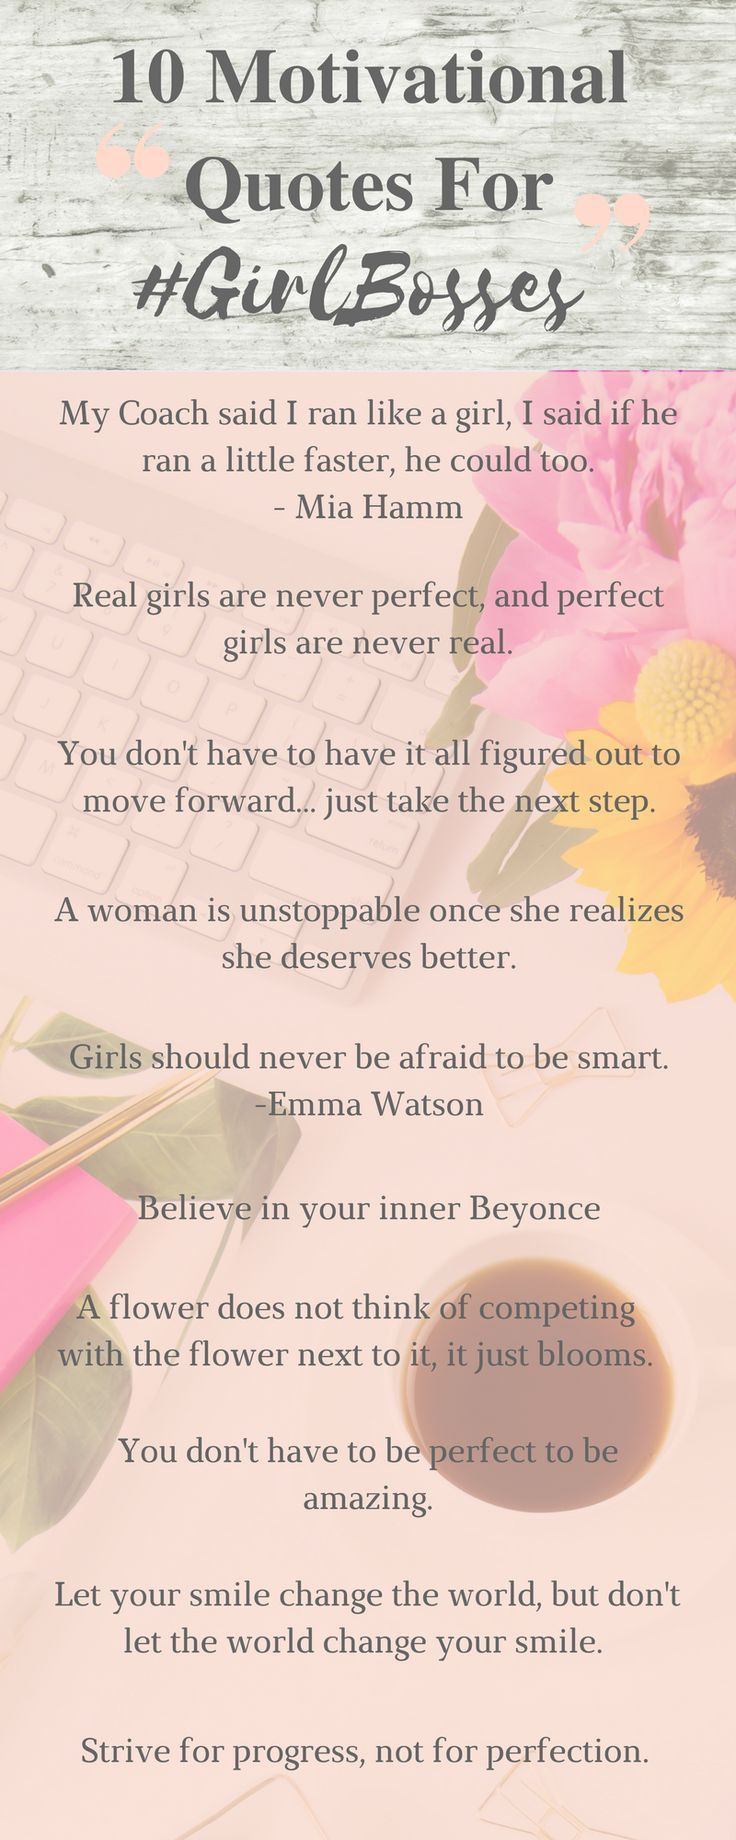 Positive Quotes For Teenage Girl
 Best 25 Inspirational quotes for teens ideas on Pinterest